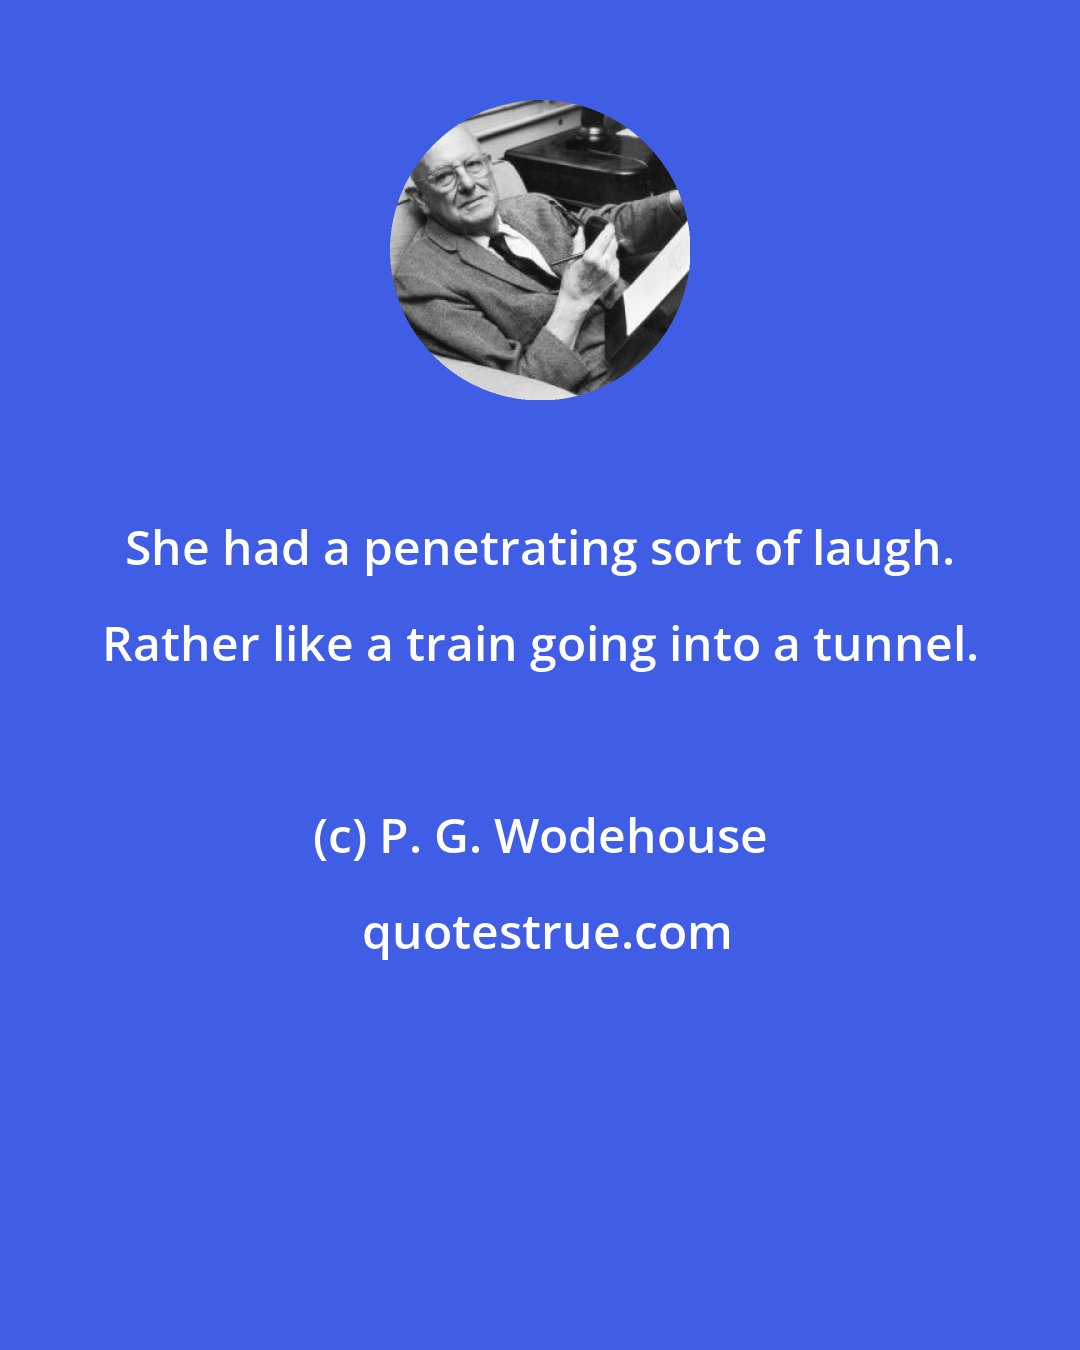 P. G. Wodehouse: She had a penetrating sort of laugh. Rather like a train going into a tunnel.